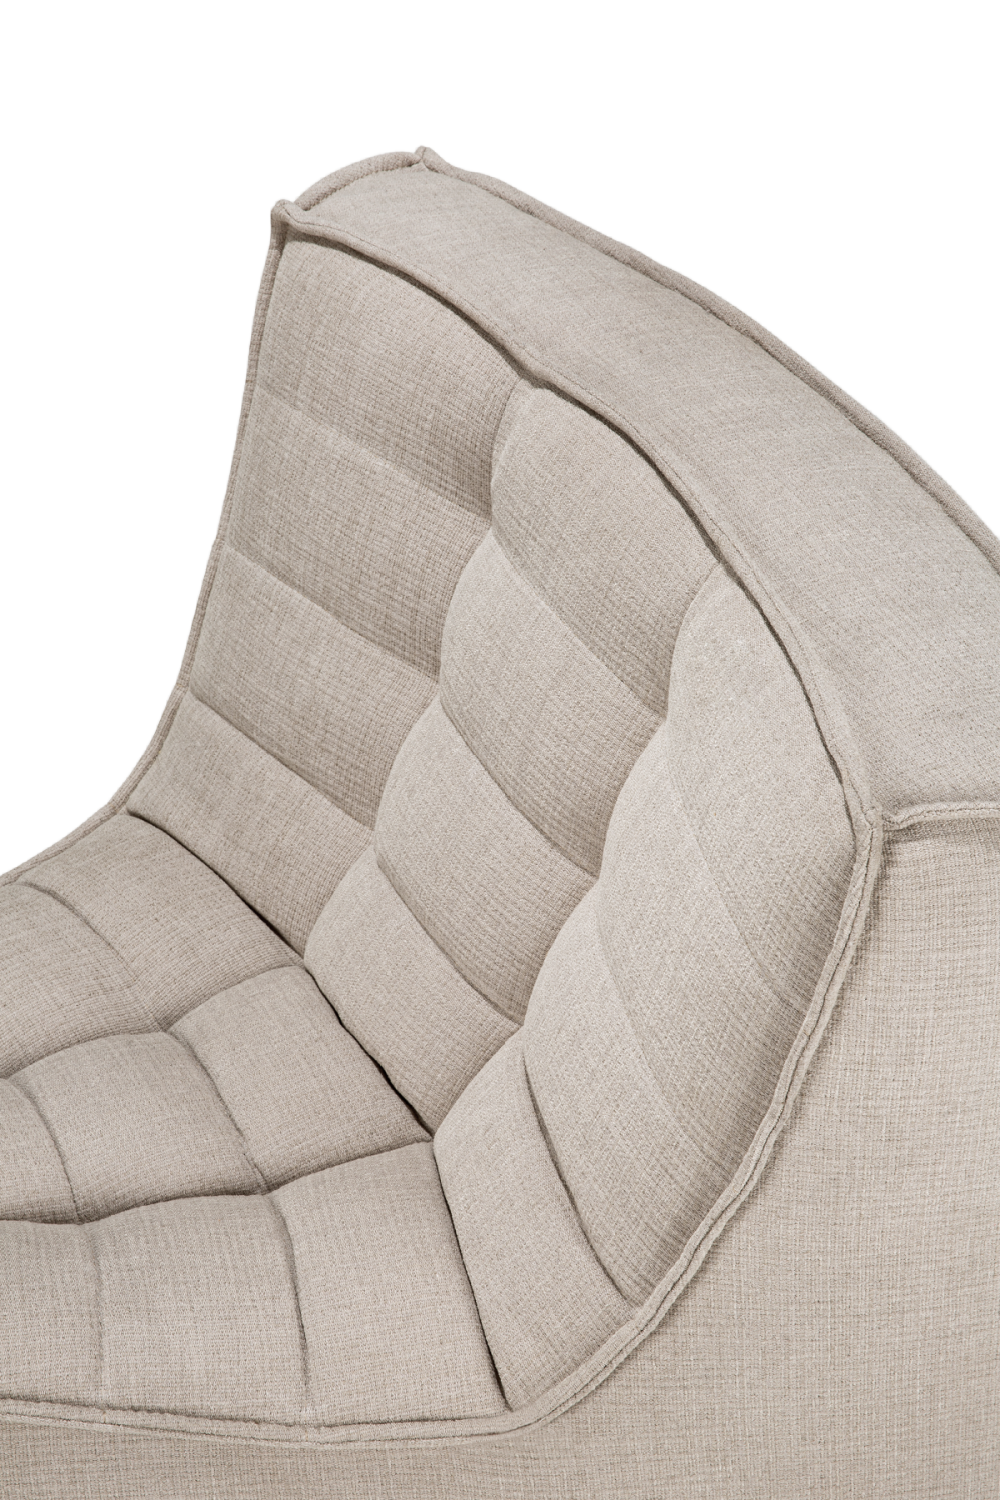 Curved Upholstered Sofa | Ethnicraft N701 | Oroa.com